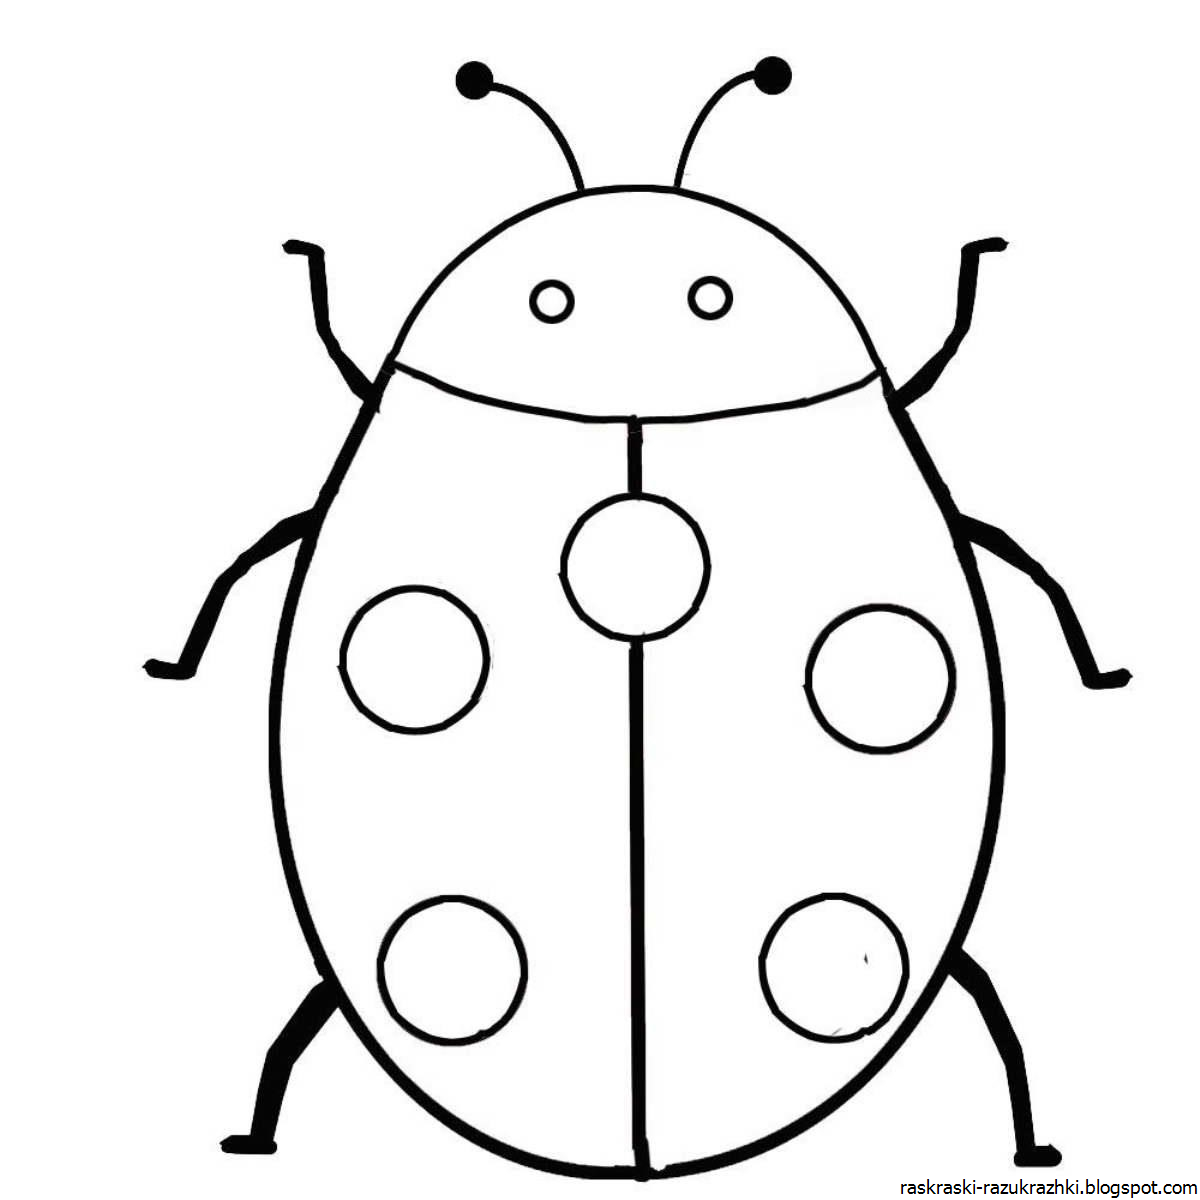 Art coloring beetles for children 3-4 years old